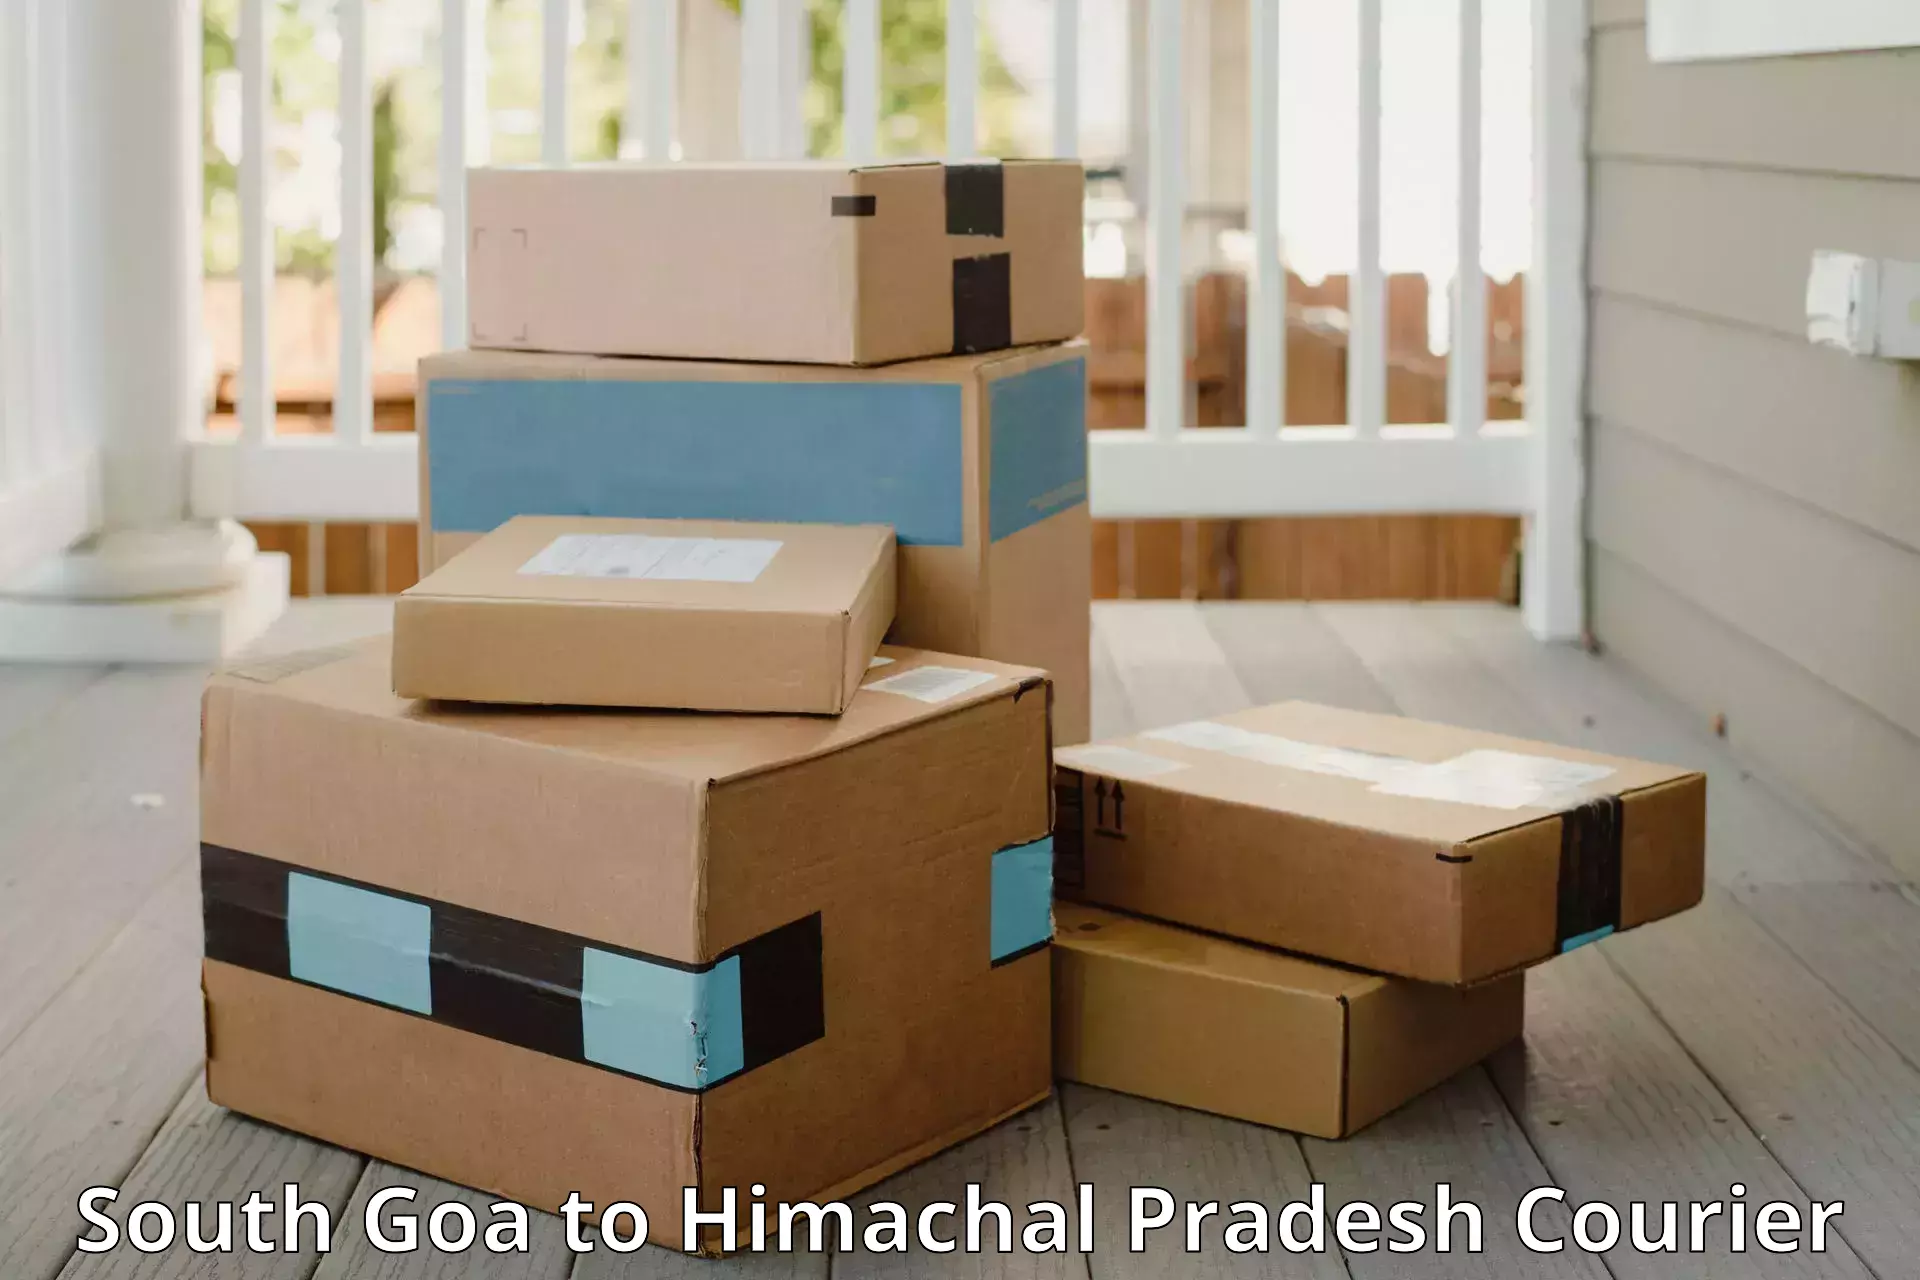 Luggage delivery app South Goa to Himachal Pradesh